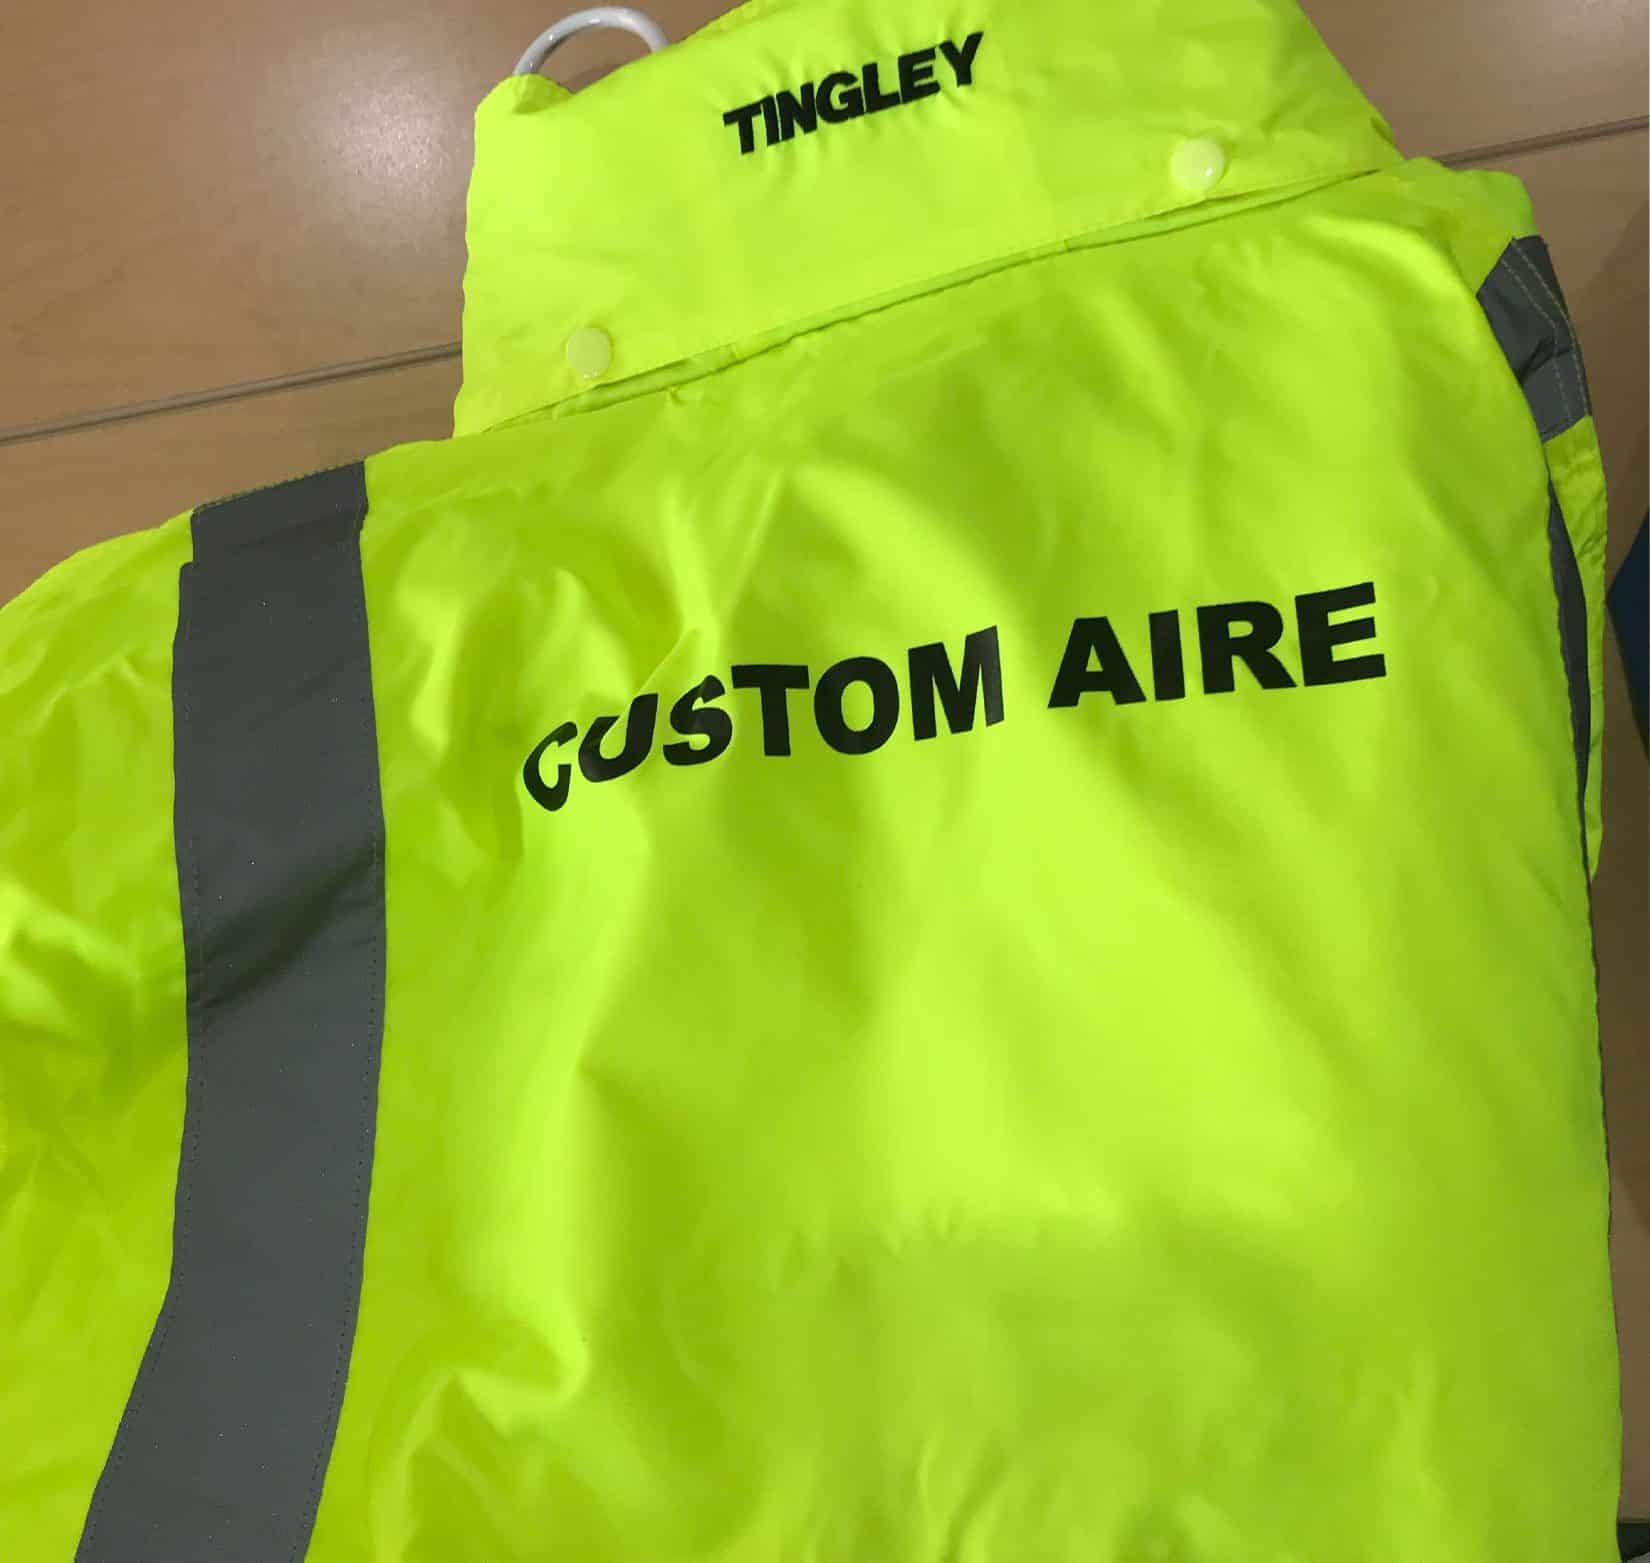 “Custom Aire” screen printed in black on the back of a neon green safety vest